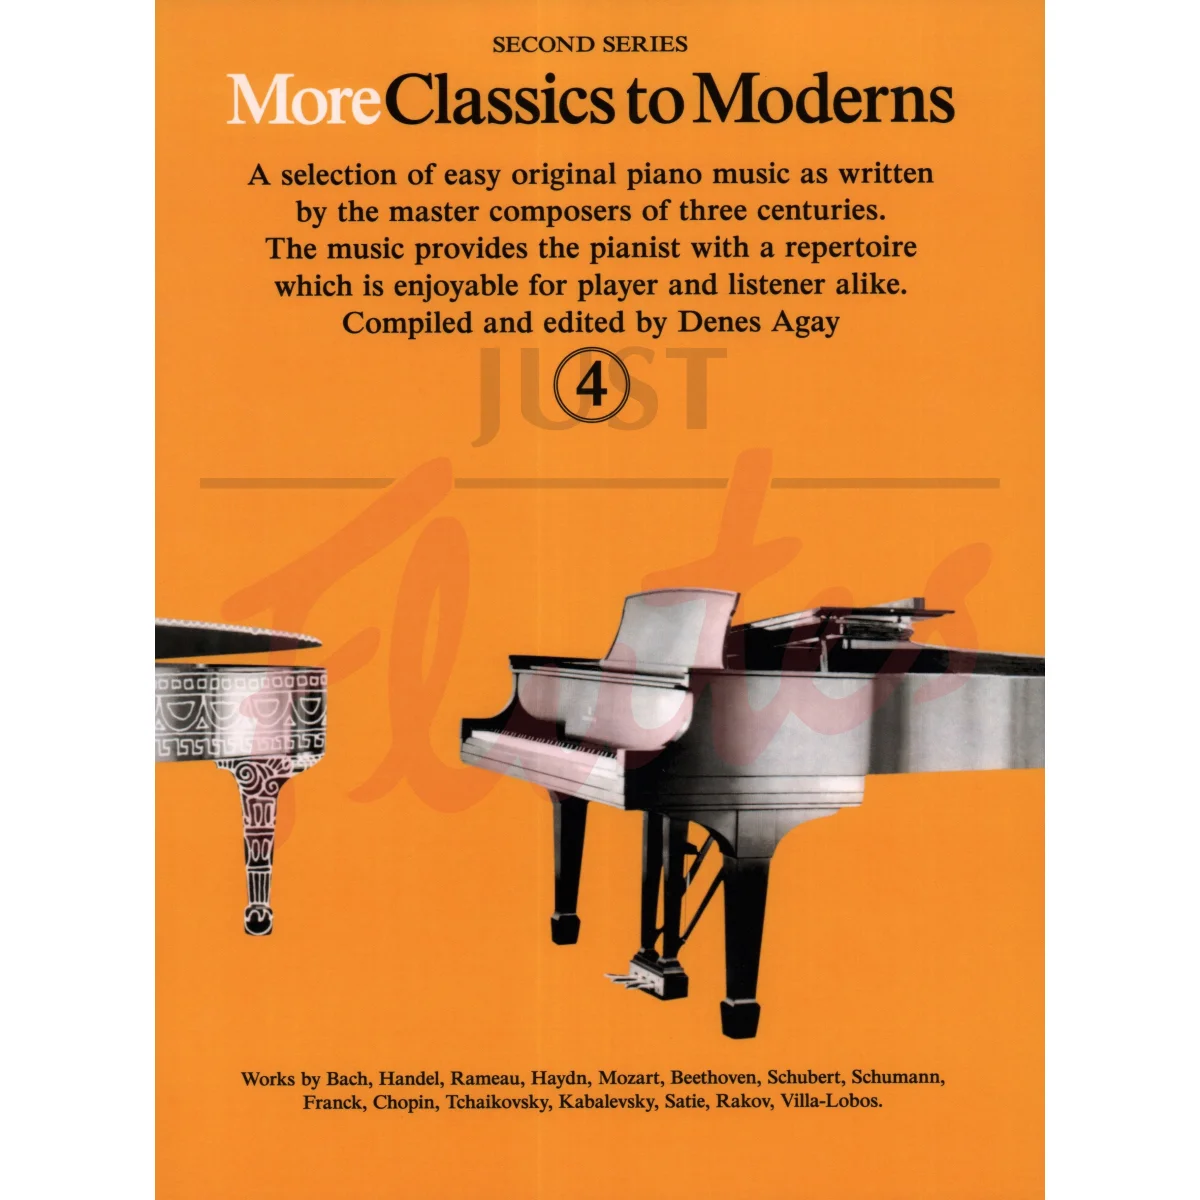 More Classics To Moderns for Piano, Book 4